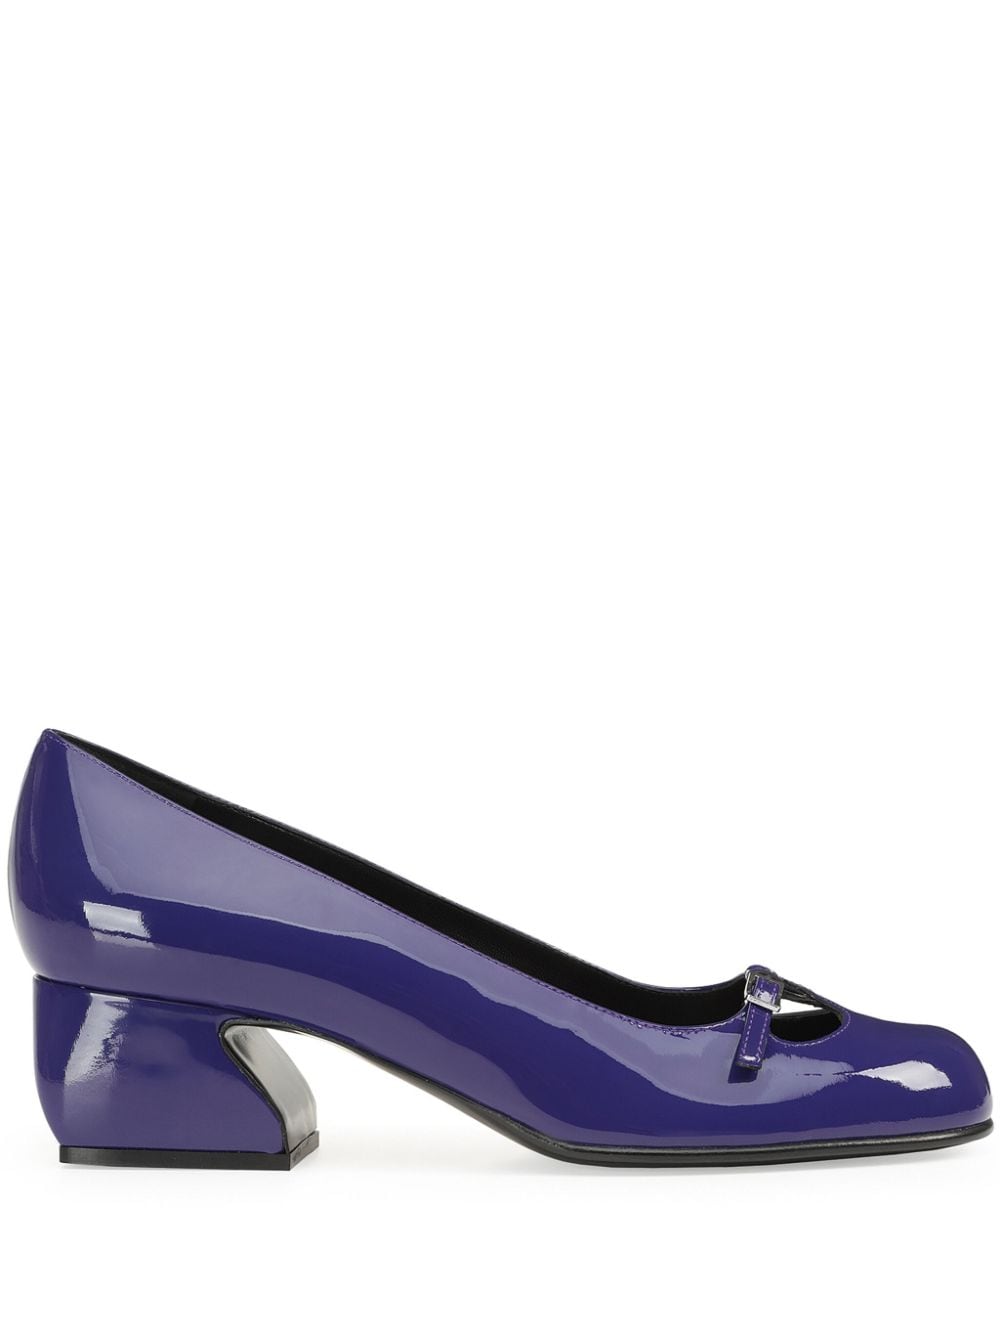 Image 1 of Sergio Rossi Si Rossie 45mm leather pumps